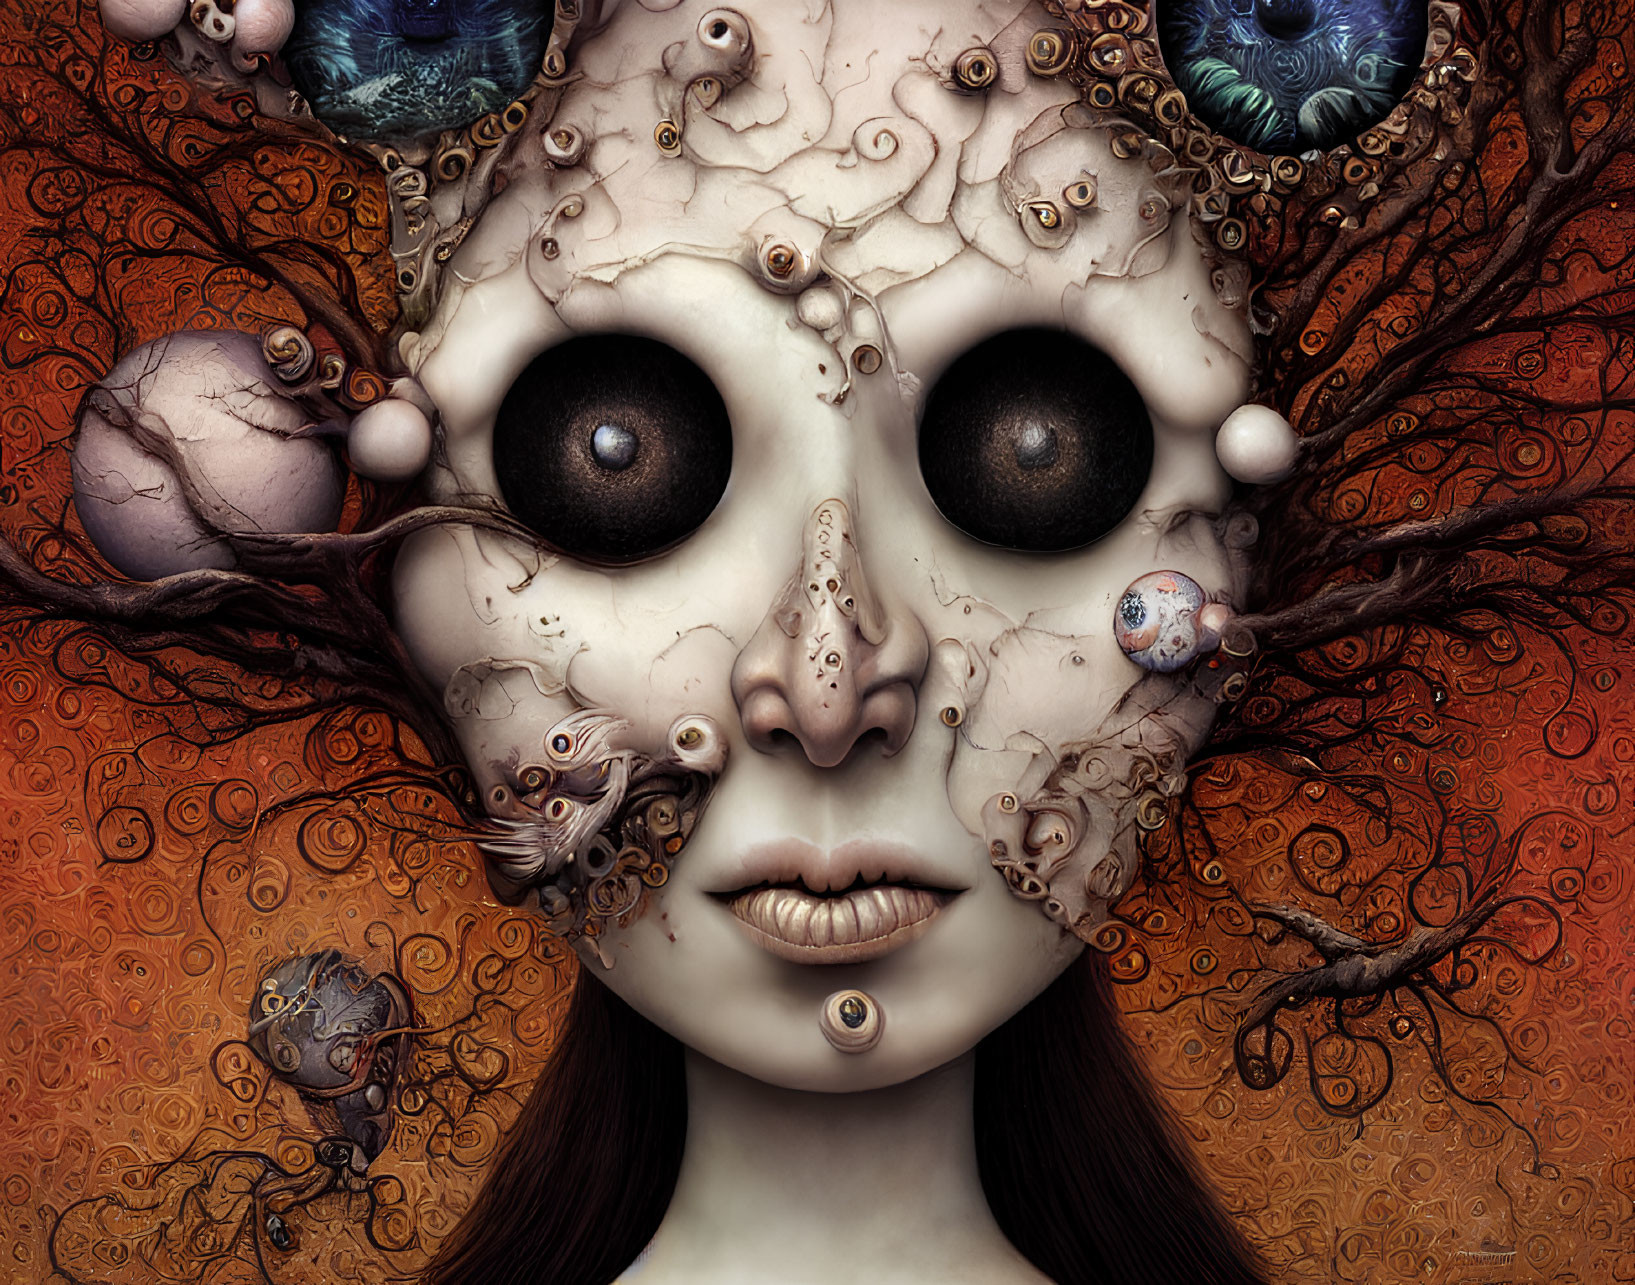 Surreal portrait with large eyes and swirling patterns for a mystical effect